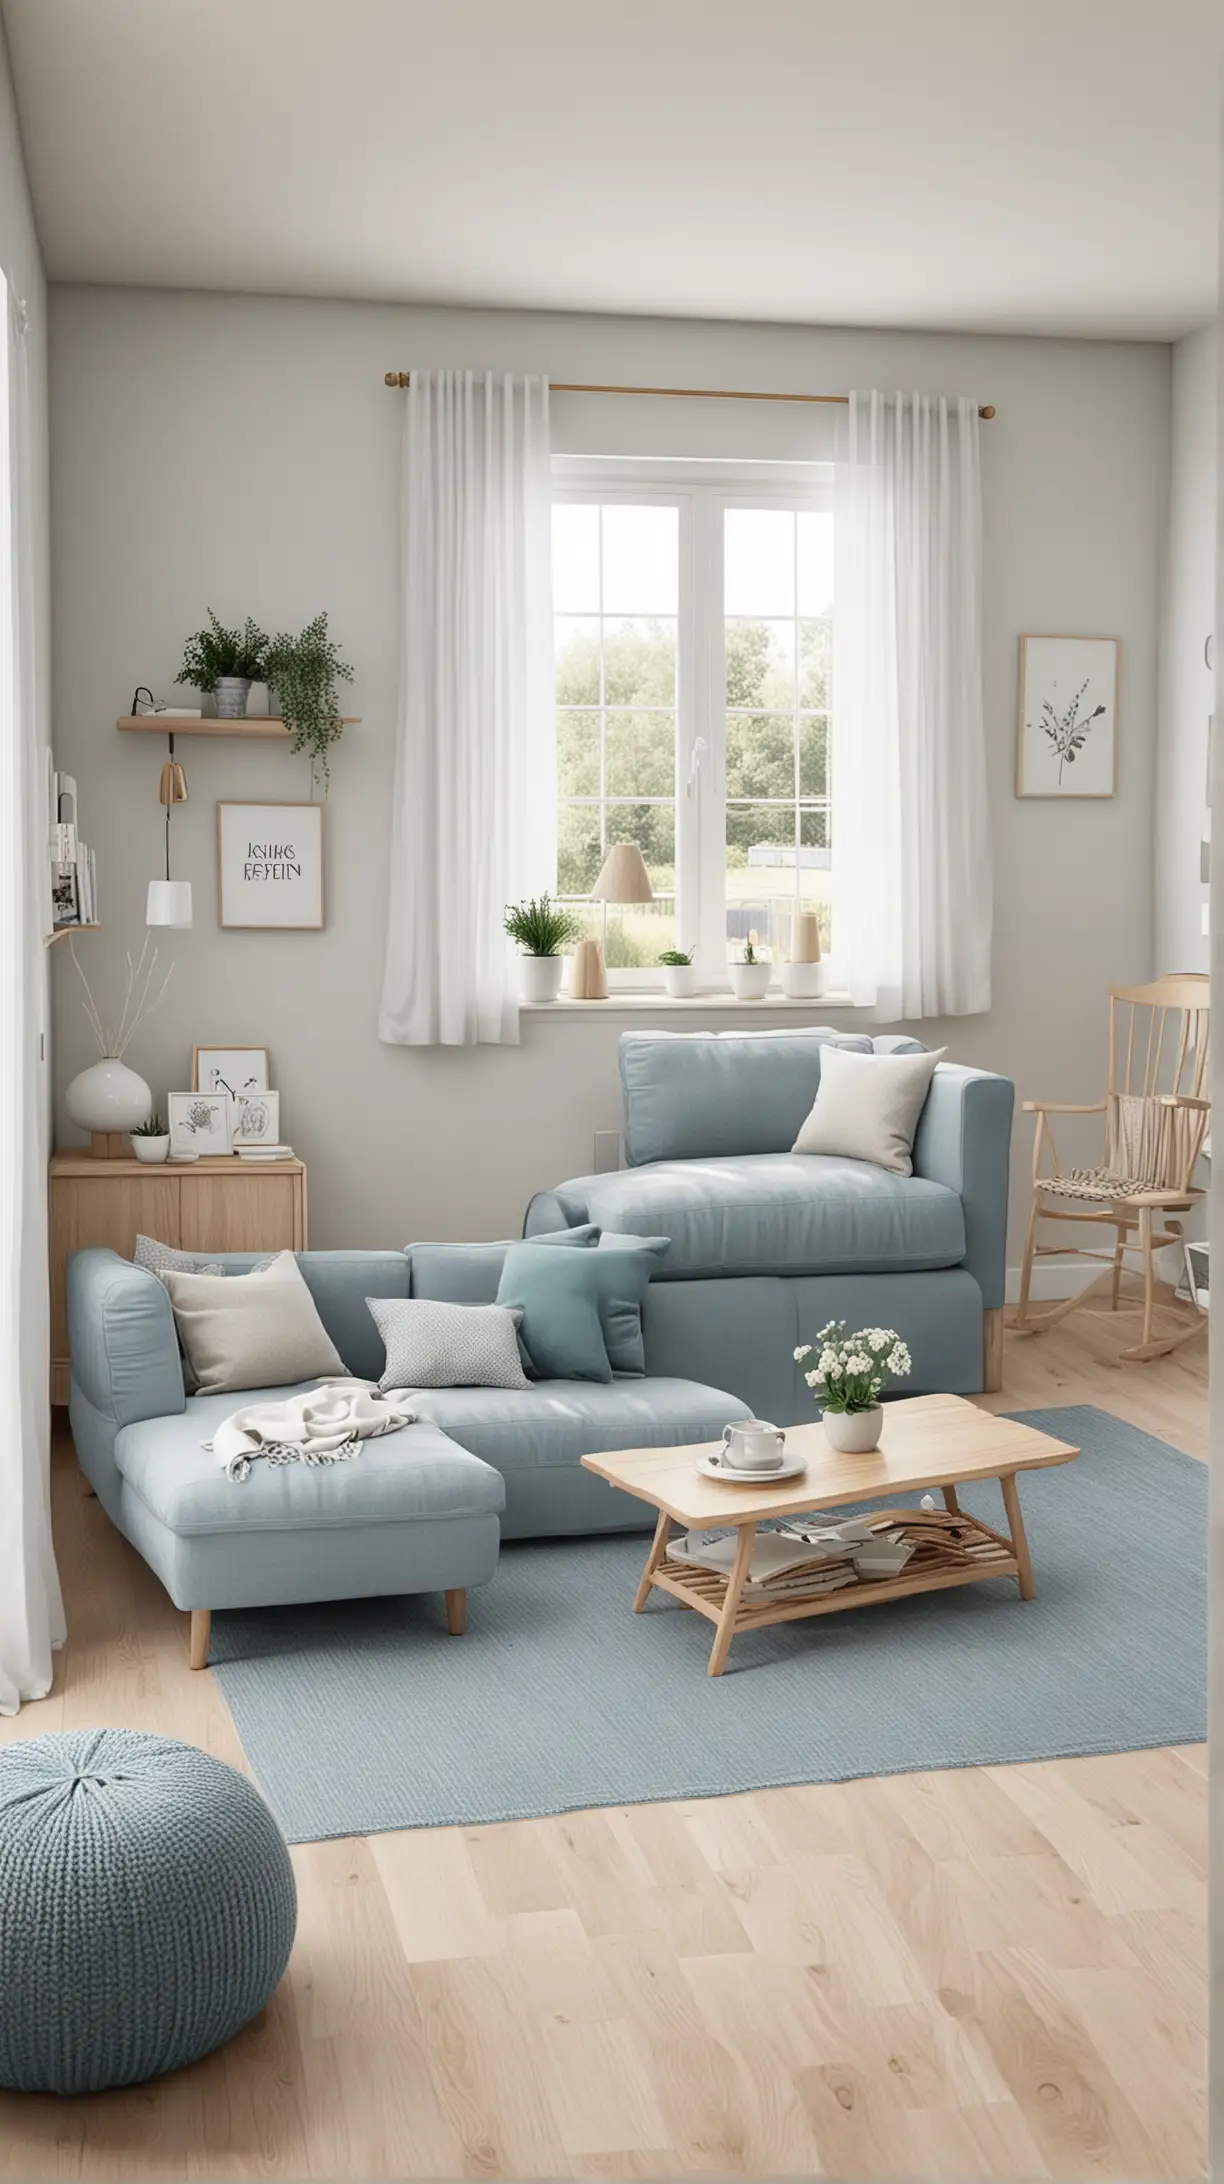 A light and airy Scandinavian-style Bloxburg living room with light wood furniture, soft blues, and minimalist decor for a functional space.